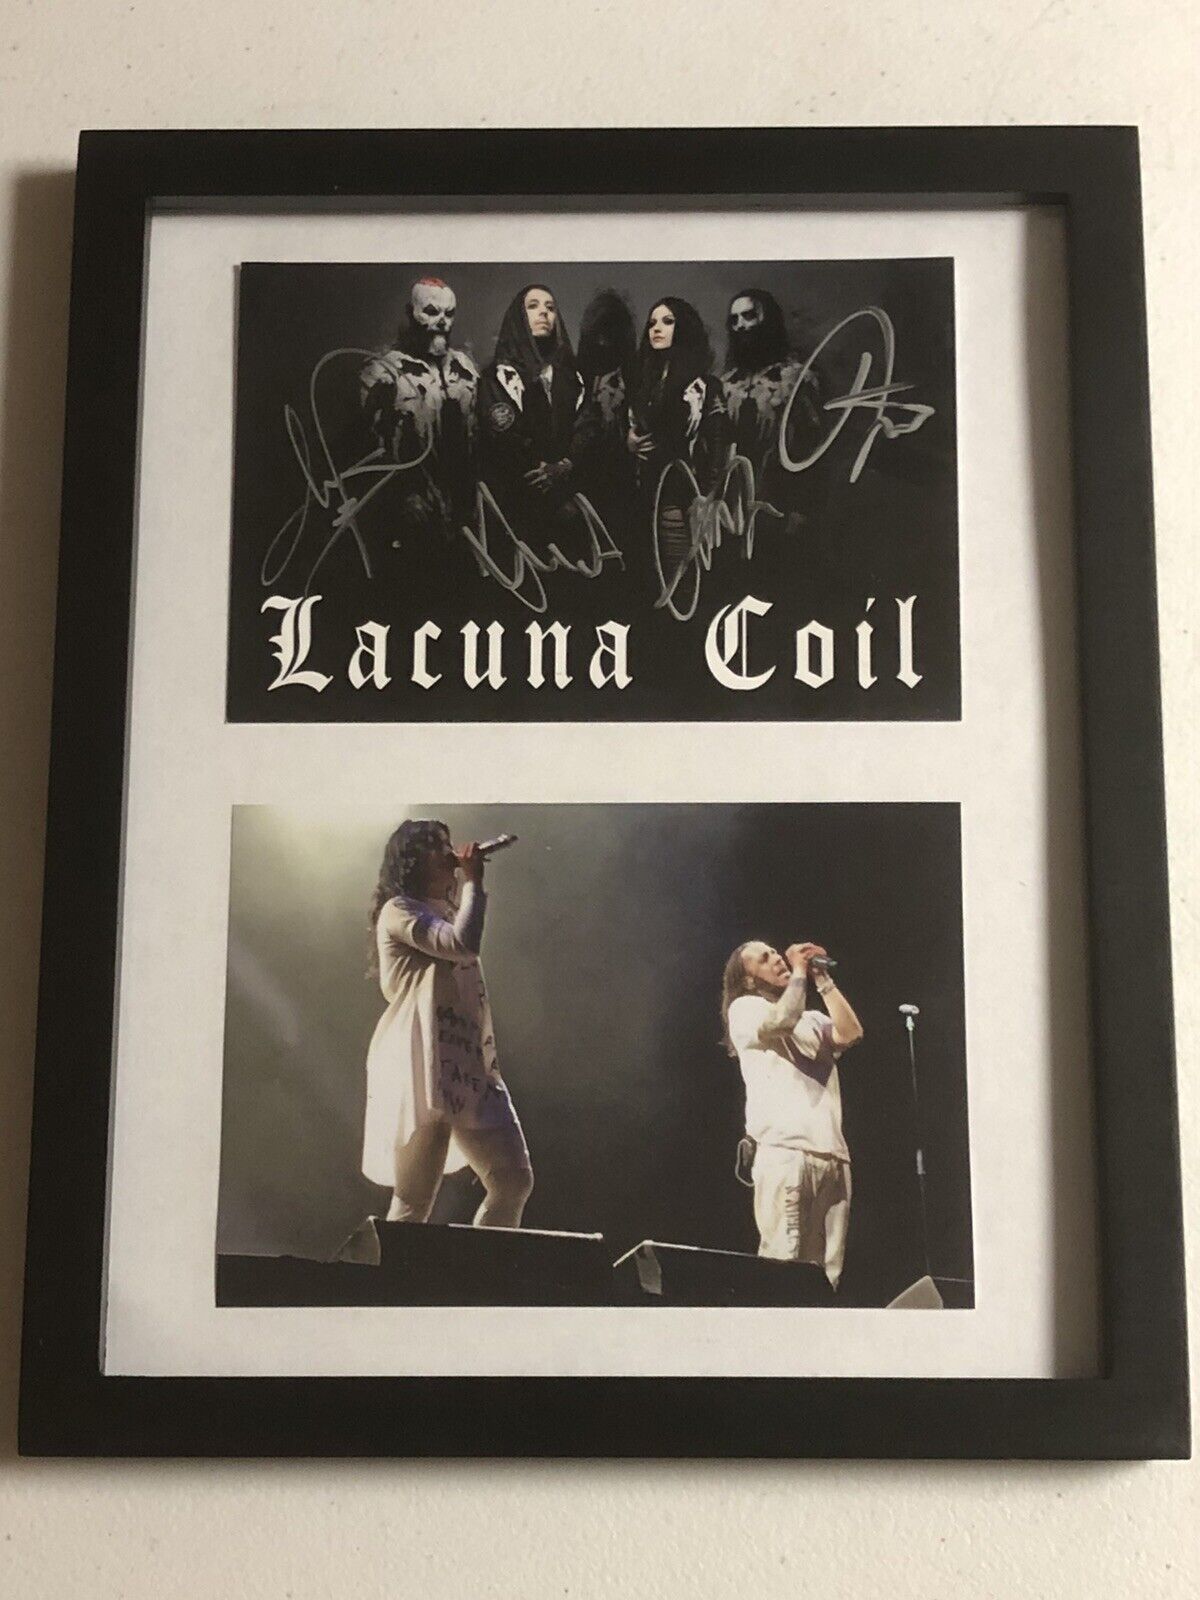 LACUNA COIL AUTOGRAPHED SIGNED FRAMED CARDSTOCK Photo Poster painting W/ SIGNING PICTURE PROOF